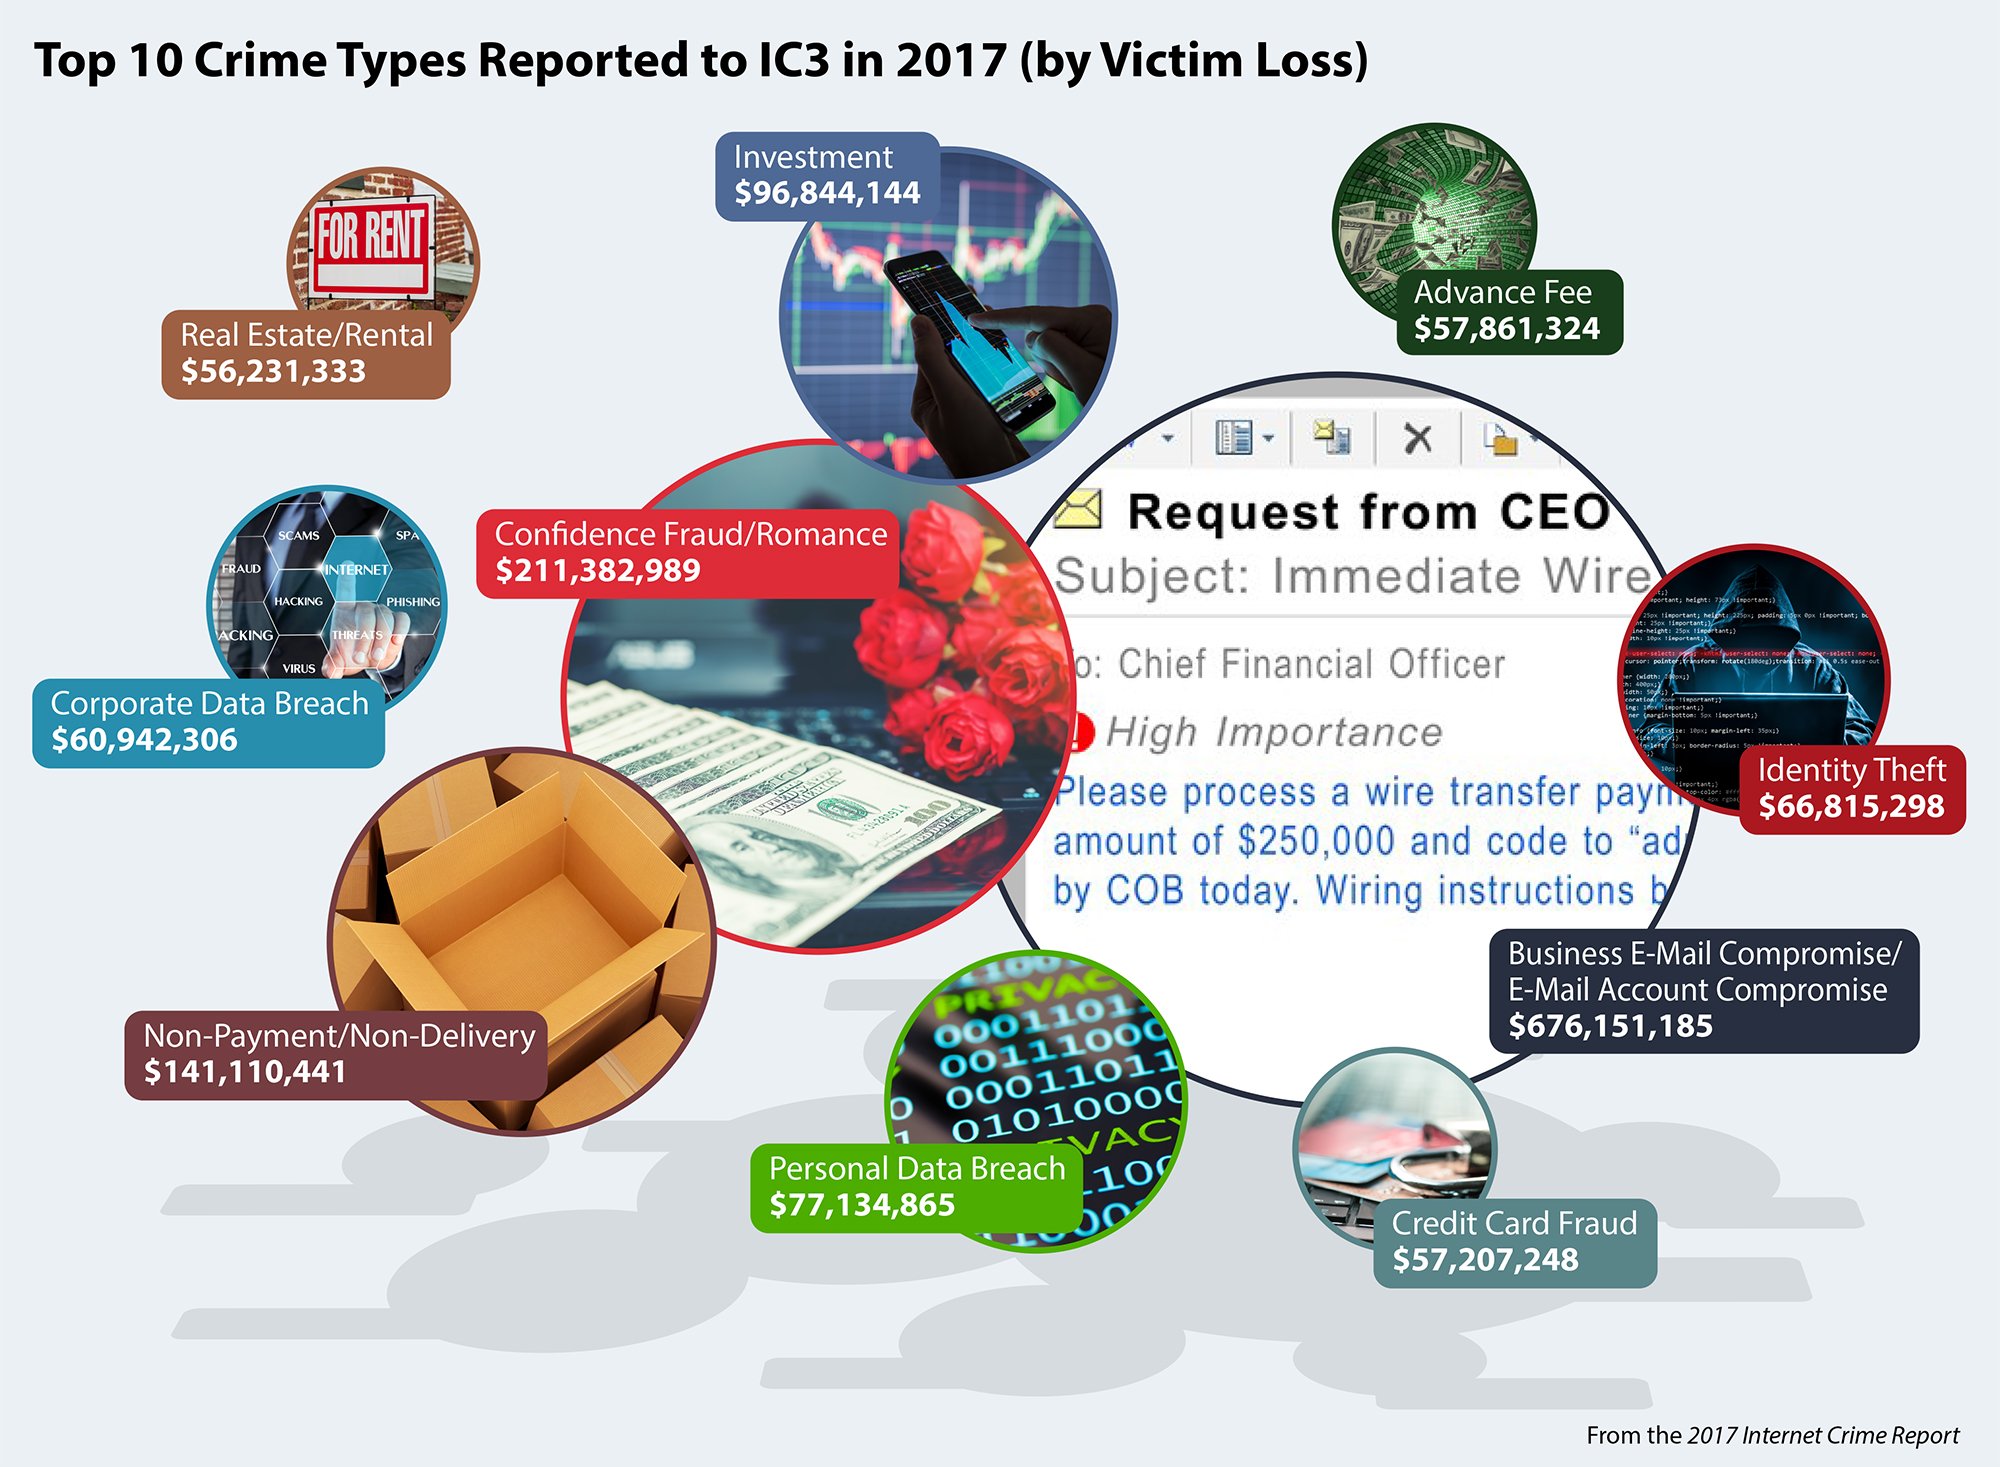 Bubble chart infographic showing top 10 crime types, by victim losses, reported to IC3 during 2017.